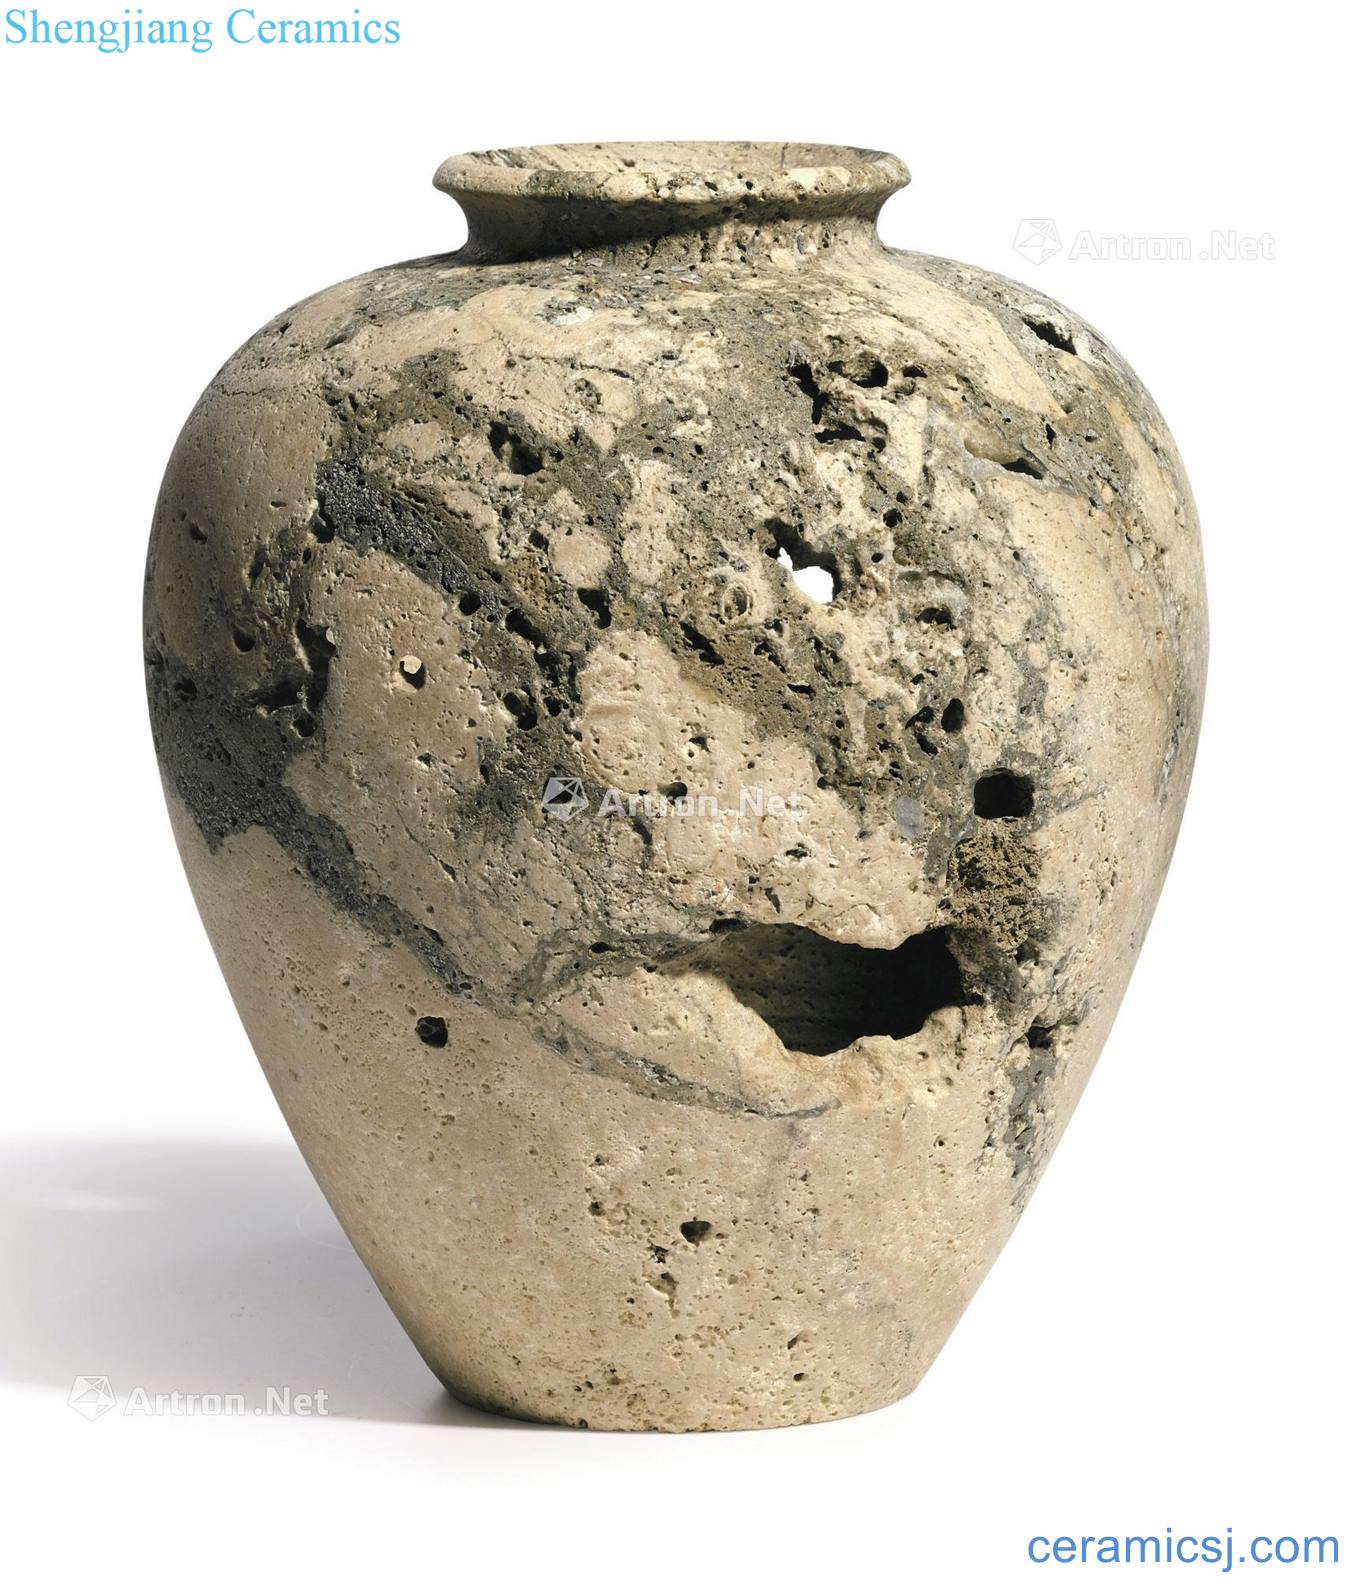 Or before the song dynasty stone jars